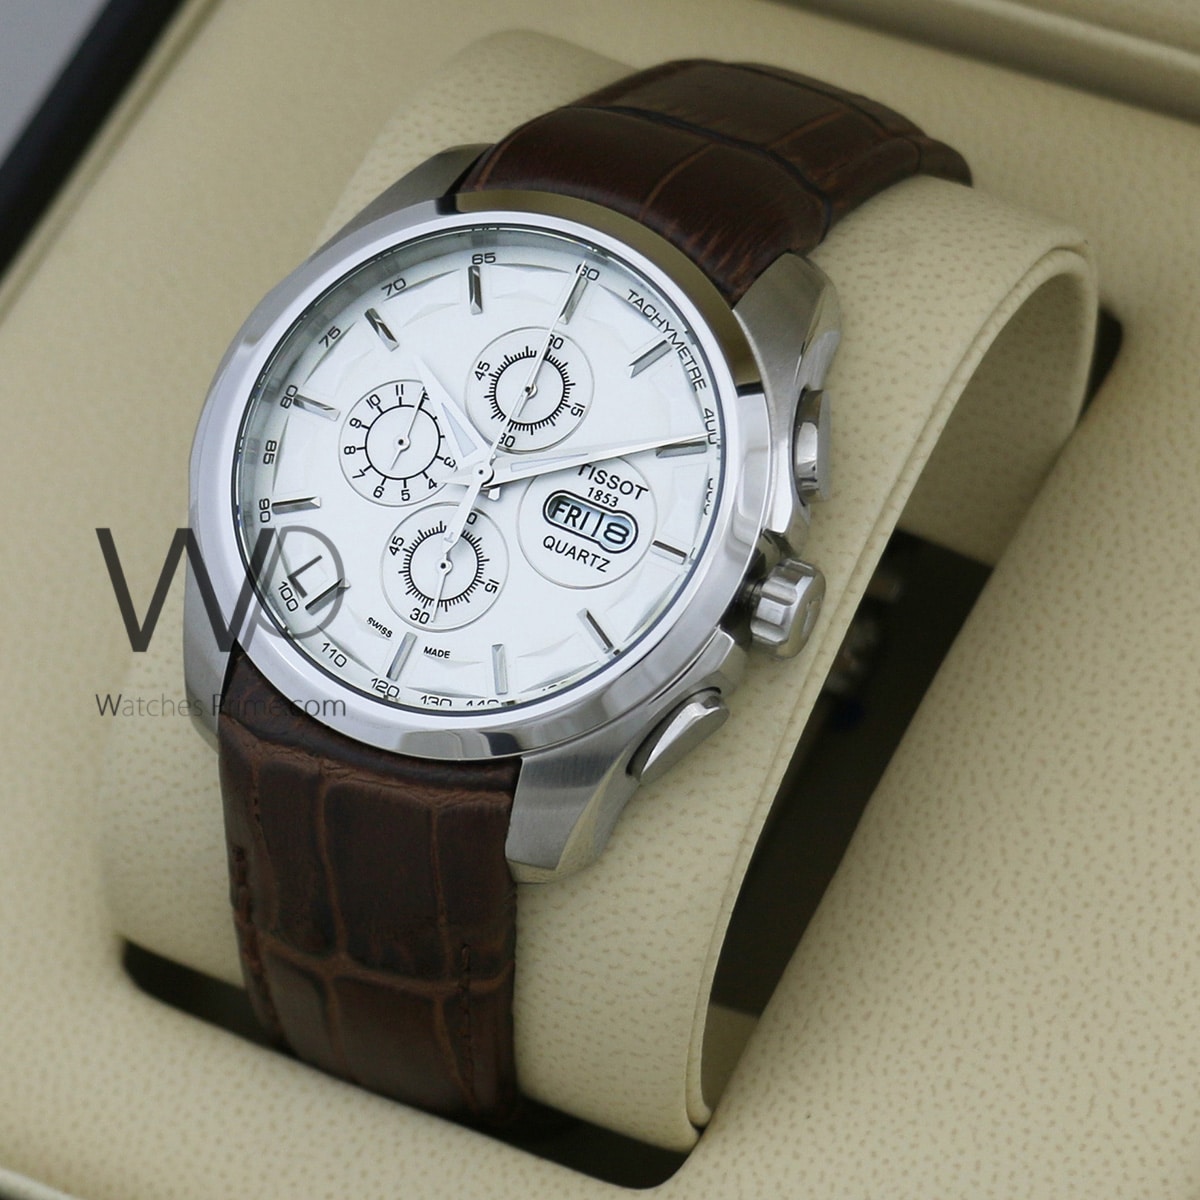 TISSOT 1853 CHRONOGRAPH WATCH WHITE WITH LEATHER BROWN BELT | Watches Prime